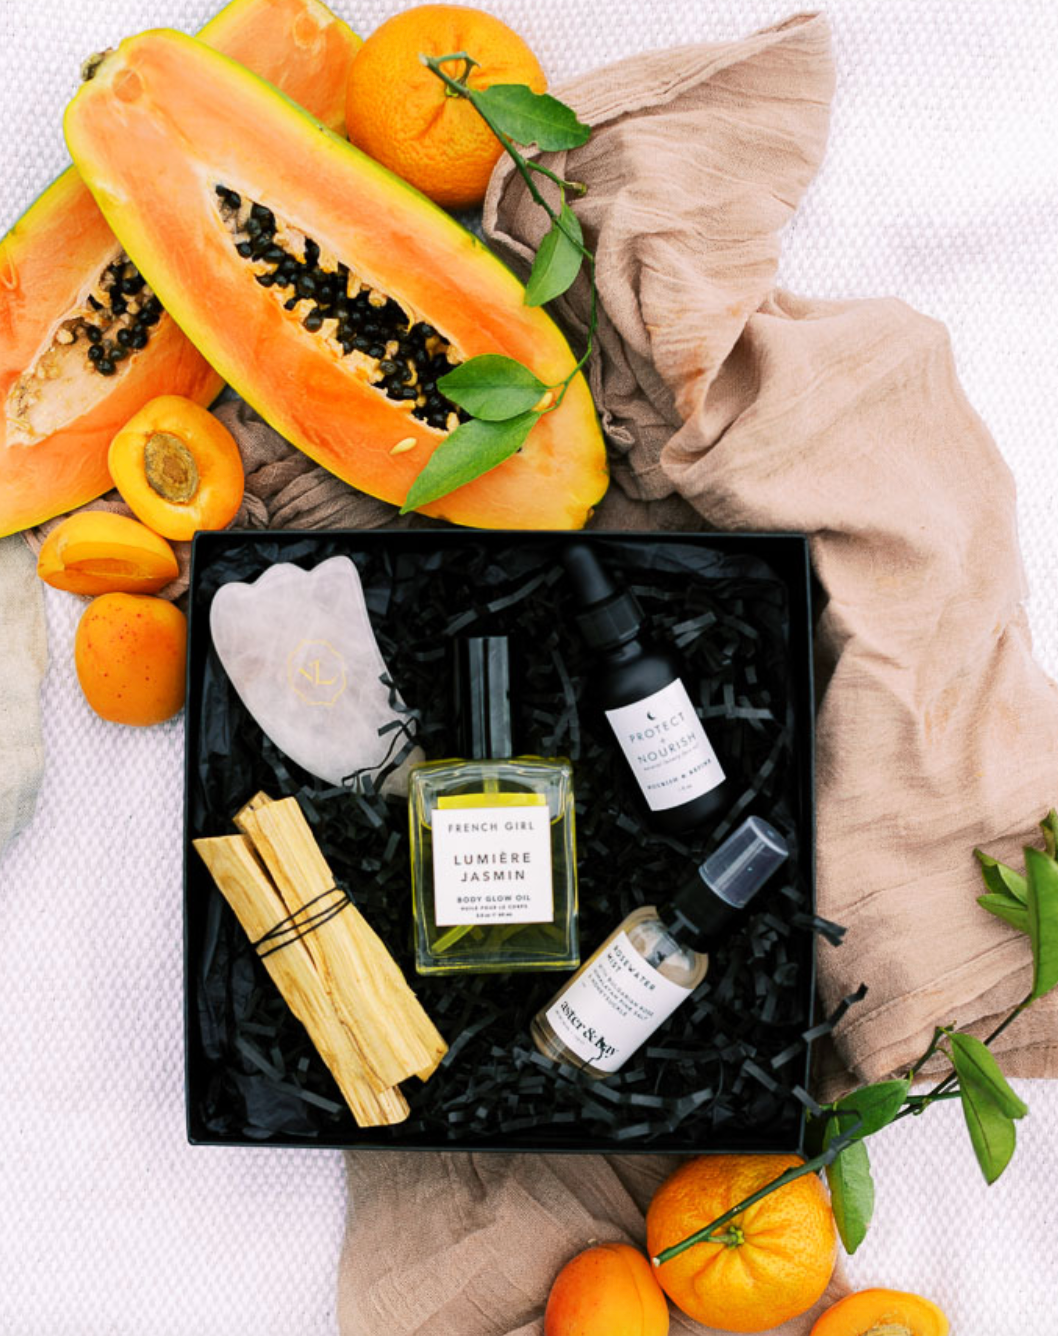 The VERDE LUSSO Clean Beauty Box